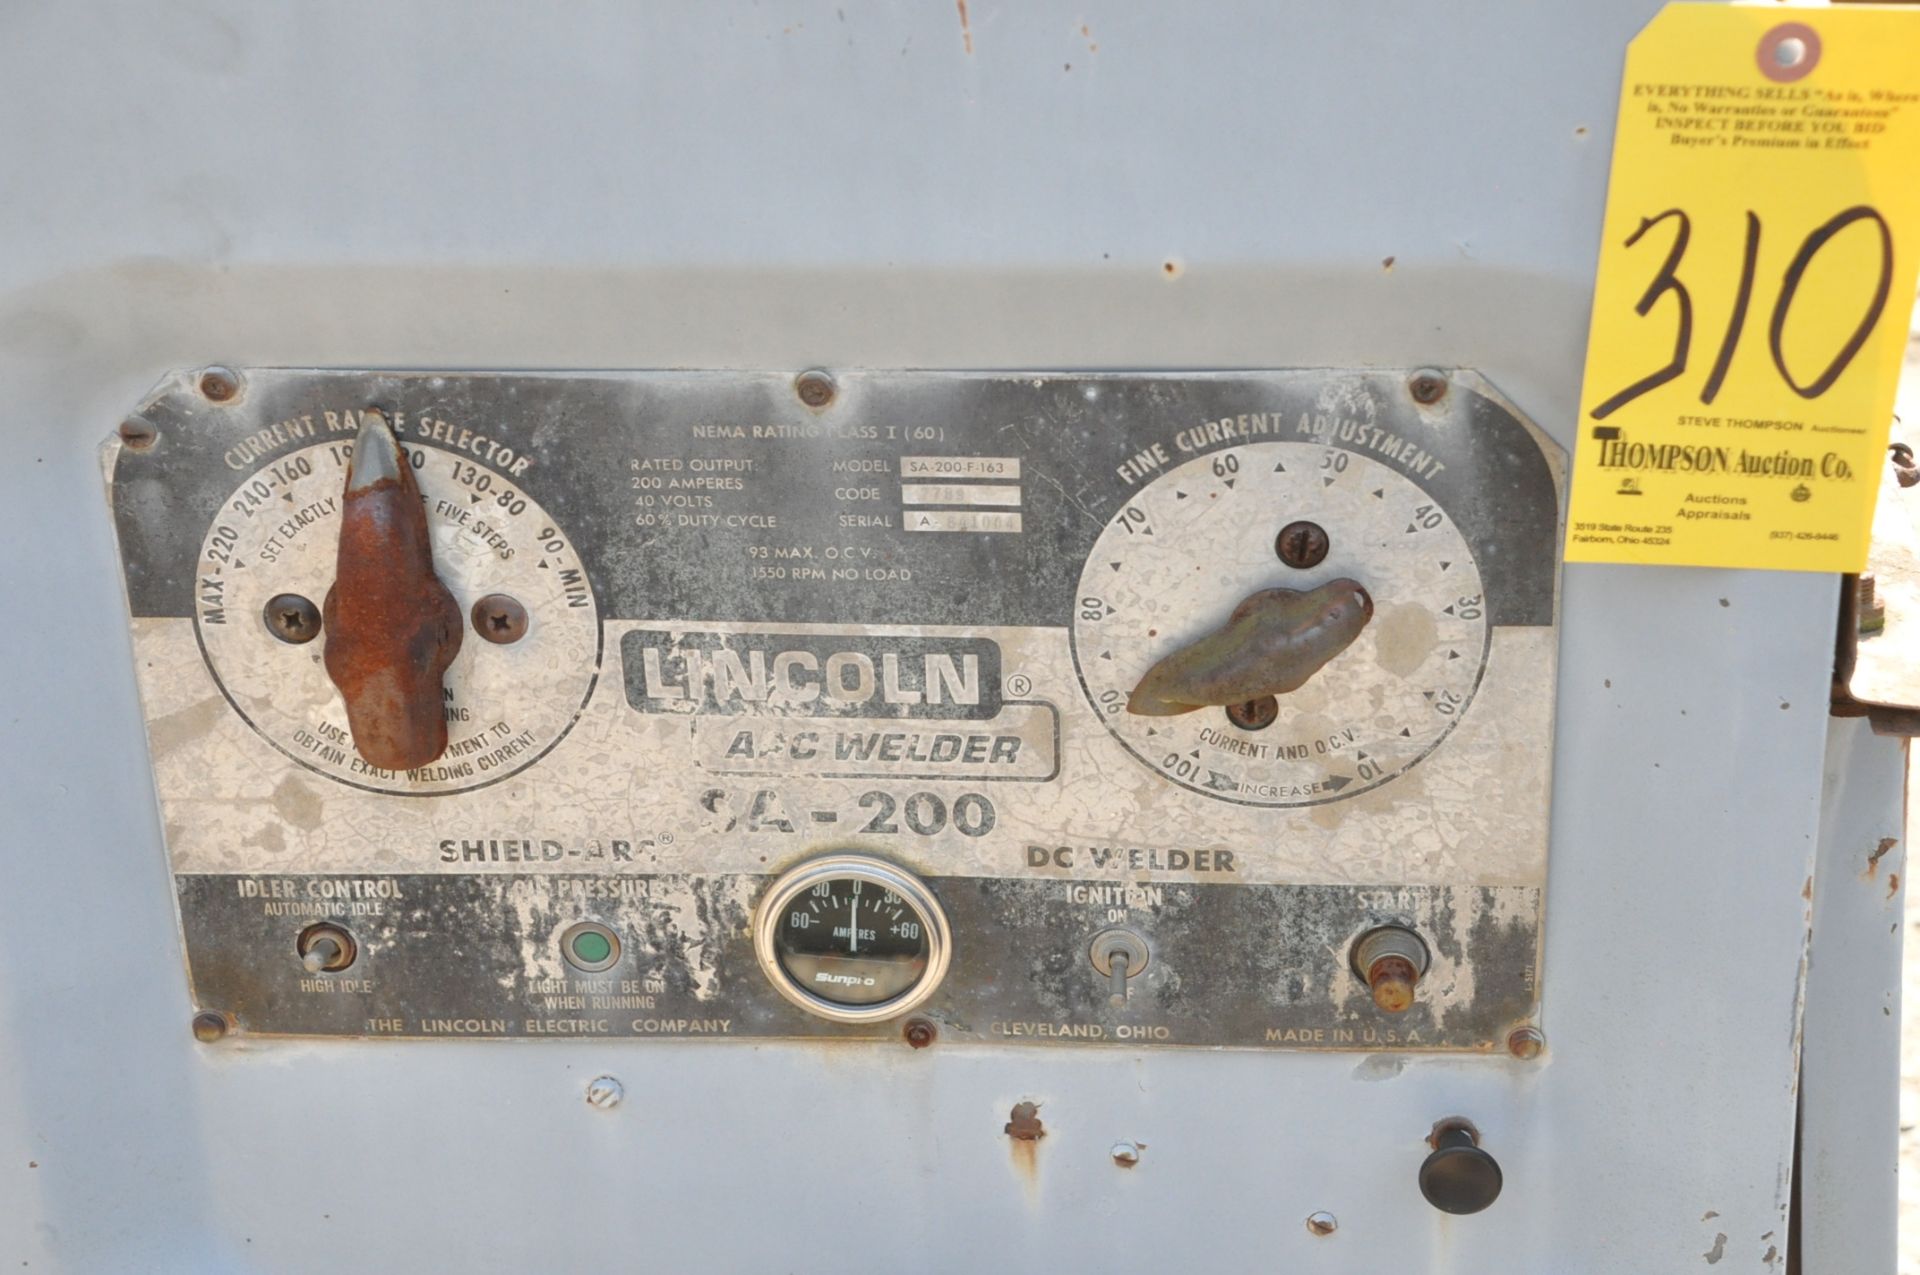 Lincoln Model SA-200, 200-Amp Capacity DC Arc Welder Power Source, S/n A841004, Diesel Engine - Image 3 of 4